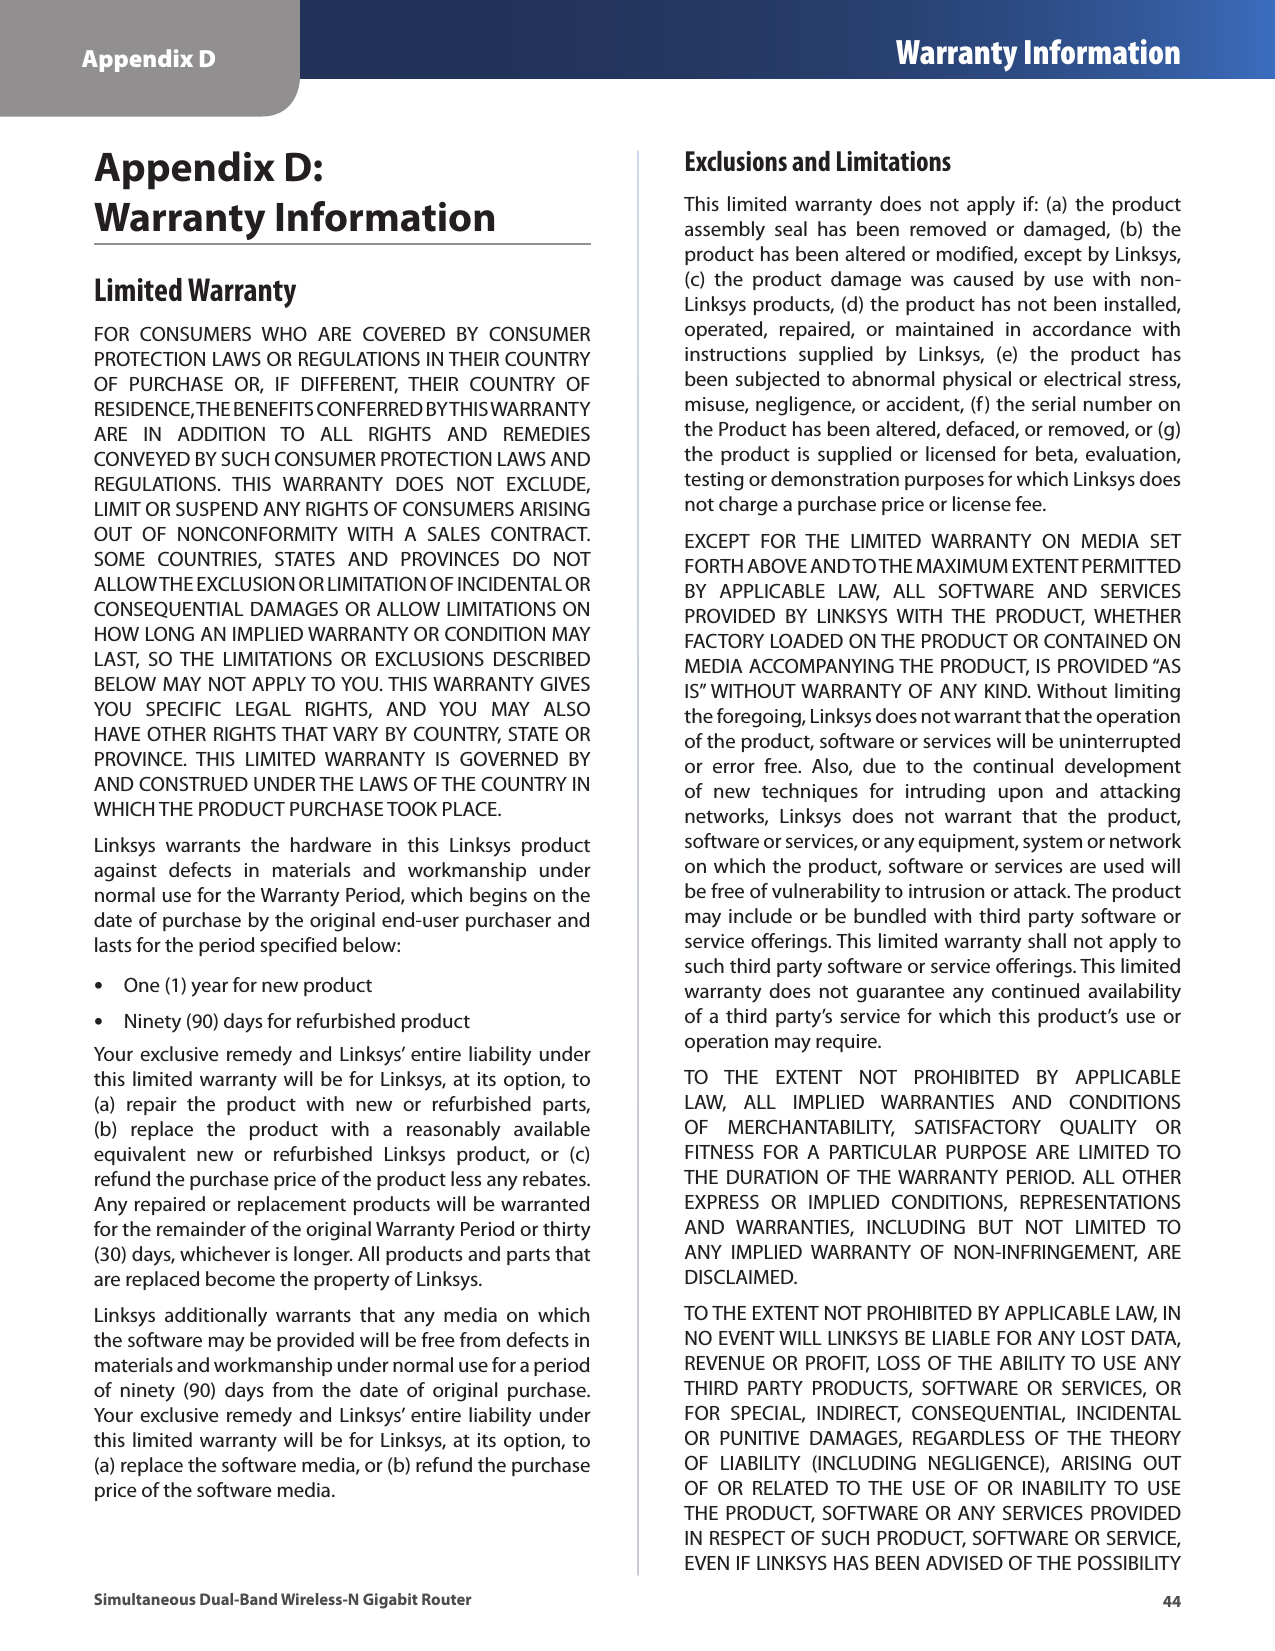 Appendix D Warranty Information44Simultaneous Dual-Band Wireless-N Gigabit RouterAppendix D:  Warranty InformationLimited WarrantyFOR  CONSUMERS  WHO  ARE  COVERED  BY  CONSUMER PROTECTION LAWS OR REGULATIONS IN THEIR COUNTRY OF  PURCHASE  OR,  IF  DIFFERENT,  THEIR  COUNTRY  OF RESIDENCE, THE BENEFITS CONFERRED BY THIS WARRANTY ARE  IN  ADDITION  TO  ALL  RIGHTS  AND  REMEDIES CONVEYED BY SUCH CONSUMER PROTECTION LAWS AND REGULATIONS.  THIS  WARRANTY  DOES  NOT  EXCLUDE, LIMIT OR SUSPEND ANY RIGHTS OF CONSUMERS ARISING OUT  OF  NONCONFORMITY  WITH  A  SALES  CONTRACT. SOME  COUNTRIES,  STATES  AND  PROVINCES  DO  NOT ALLOW THE EXCLUSION OR LIMITATION OF INCIDENTAL OR CONSEQUENTIAL DAMAGES OR ALLOW LIMITATIONS ON HOW LONG AN IMPLIED WARRANTY OR CONDITION MAY LAST,  SO THE  LIMITATIONS  OR  EXCLUSIONS  DESCRIBED BELOW MAY NOT APPLY TO YOU. THIS WARRANTY GIVES YOU  SPECIFIC  LEGAL  RIGHTS,  AND  YOU  MAY  ALSO HAVE OTHER RIGHTS THAT VARY BY COUNTRY, STATE OR PROVINCE.  THIS  LIMITED  WARRANTY  IS  GOVERNED  BY AND CONSTRUED UNDER THE LAWS OF THE COUNTRY IN WHICH THE PRODUCT PURCHASE TOOK PLACE.Linksys  warrants  the  hardware  in  this  Linksys  product against  defects  in  materials  and  workmanship  under normal use for the Warranty Period, which begins on the date of purchase by the original end-user purchaser and lasts for the period specified below: •One (1) year for new product •Ninety (90) days for refurbished productYour exclusive remedy and Linksys’ entire liability under this limited warranty will be for Linksys, at its option, to (a)  repair  the  product  with  new  or  refurbished  parts, (b)  replace  the  product  with  a  reasonably  available equivalent  new  or  refurbished  Linksys  product,  or  (c) refund the purchase price of the product less any rebates. Any repaired or replacement products will be warranted for the remainder of the original Warranty Period or thirty (30) days, whichever is longer. All products and parts that are replaced become the property of Linksys.Linksys  additionally  warrants  that  any  media  on  which the software may be provided will be free from defects in materials and workmanship under normal use for a period of  ninety  (90)  days  from  the  date  of  original  purchase. Your exclusive remedy and Linksys’ entire liability under this limited warranty will be for Linksys, at its option, to (a) replace the software media, or (b) refund the purchase price of the software media.Exclusions and LimitationsThis  limited  warranty  does  not  apply  if:  (a)  the  product assembly  seal  has  been  removed  or  damaged,  (b)  the product has been altered or modified, except by Linksys, (c)  the  product  damage  was  caused  by  use  with  non-Linksys products, (d) the product has not been installed, operated,  repaired,  or  maintained  in  accordance  with instructions  supplied  by  Linksys,  (e)  the  product  has been subjected to abnormal physical or electrical stress, misuse, negligence, or accident, (f) the serial number on the Product has been altered, defaced, or removed, or (g) the product  is  supplied  or  licensed  for  beta,  evaluation, testing or demonstration purposes for which Linksys does not charge a purchase price or license fee.EXCEPT  FOR  THE  LIMITED  WARRANTY  ON  MEDIA  SET FORTH ABOVE AND TO THE MAXIMUM EXTENT PERMITTED BY  APPLICABLE  LAW,  ALL  SOFTWARE  AND  SERVICES PROVIDED  BY  LINKSYS  WITH  THE  PRODUCT,  WHETHER FACTORY LOADED ON THE PRODUCT OR CONTAINED ON MEDIA ACCOMPANYING THE PRODUCT, IS PROVIDED “AS IS” WITHOUT WARRANTY OF ANY KIND. Without limiting the foregoing, Linksys does not warrant that the operation of the product, software or services will be uninterrupted or  error  free.  Also,  due  to  the  continual  development of  new  techniques  for  intruding  upon  and  attacking networks,  Linksys  does  not  warrant  that  the  product, software or services, or any equipment, system or network on which the product, software or services are used will be free of vulnerability to intrusion or attack. The product may include or  be bundled with  third party software or service offerings. This limited warranty shall not apply to such third party software or service offerings. This limited warranty  does  not  guarantee  any  continued  availability of a  third  party’s service for  which  this  product’s  use  or operation may require. TO  THE  EXTENT  NOT  PROHIBITED  BY  APPLICABLE LAW,  ALL  IMPLIED  WARRANTIES  AND  CONDITIONS OF  MERCHANTABILITY,  SATISFACTORY  QUALITY  OR FITNESS  FOR  A  PARTICULAR  PURPOSE  ARE  LIMITED  TO THE  DURATION  OF THE WARRANTY  PERIOD.  ALL  OTHER EXPRESS  OR  IMPLIED  CONDITIONS,  REPRESENTATIONS AND  WARRANTIES,  INCLUDING  BUT  NOT  LIMITED  TO ANY  IMPLIED  WARRANTY  OF  NON-INFRINGEMENT,  ARE DISCLAIMED. TO THE EXTENT NOT PROHIBITED BY APPLICABLE LAW, IN NO EVENT WILL LINKSYS BE LIABLE FOR ANY LOST DATA, REVENUE OR PROFIT,  LOSS OF THE  ABILITY TO USE  ANY THIRD  PARTY  PRODUCTS,  SOFTWARE  OR  SERVICES,  OR FOR  SPECIAL,  INDIRECT,  CONSEQUENTIAL,  INCIDENTAL OR  PUNITIVE  DAMAGES,  REGARDLESS  OF  THE  THEORY OF  LIABILITY  (INCLUDING  NEGLIGENCE),  ARISING  OUT OF  OR  RELATED  TO  THE  USE  OF  OR  INABILITY  TO  USE THE PRODUCT, SOFTWARE OR ANY SERVICES PROVIDED IN RESPECT OF SUCH PRODUCT, SOFTWARE OR SERVICE, EVEN IF LINKSYS HAS BEEN ADVISED OF THE POSSIBILITY 